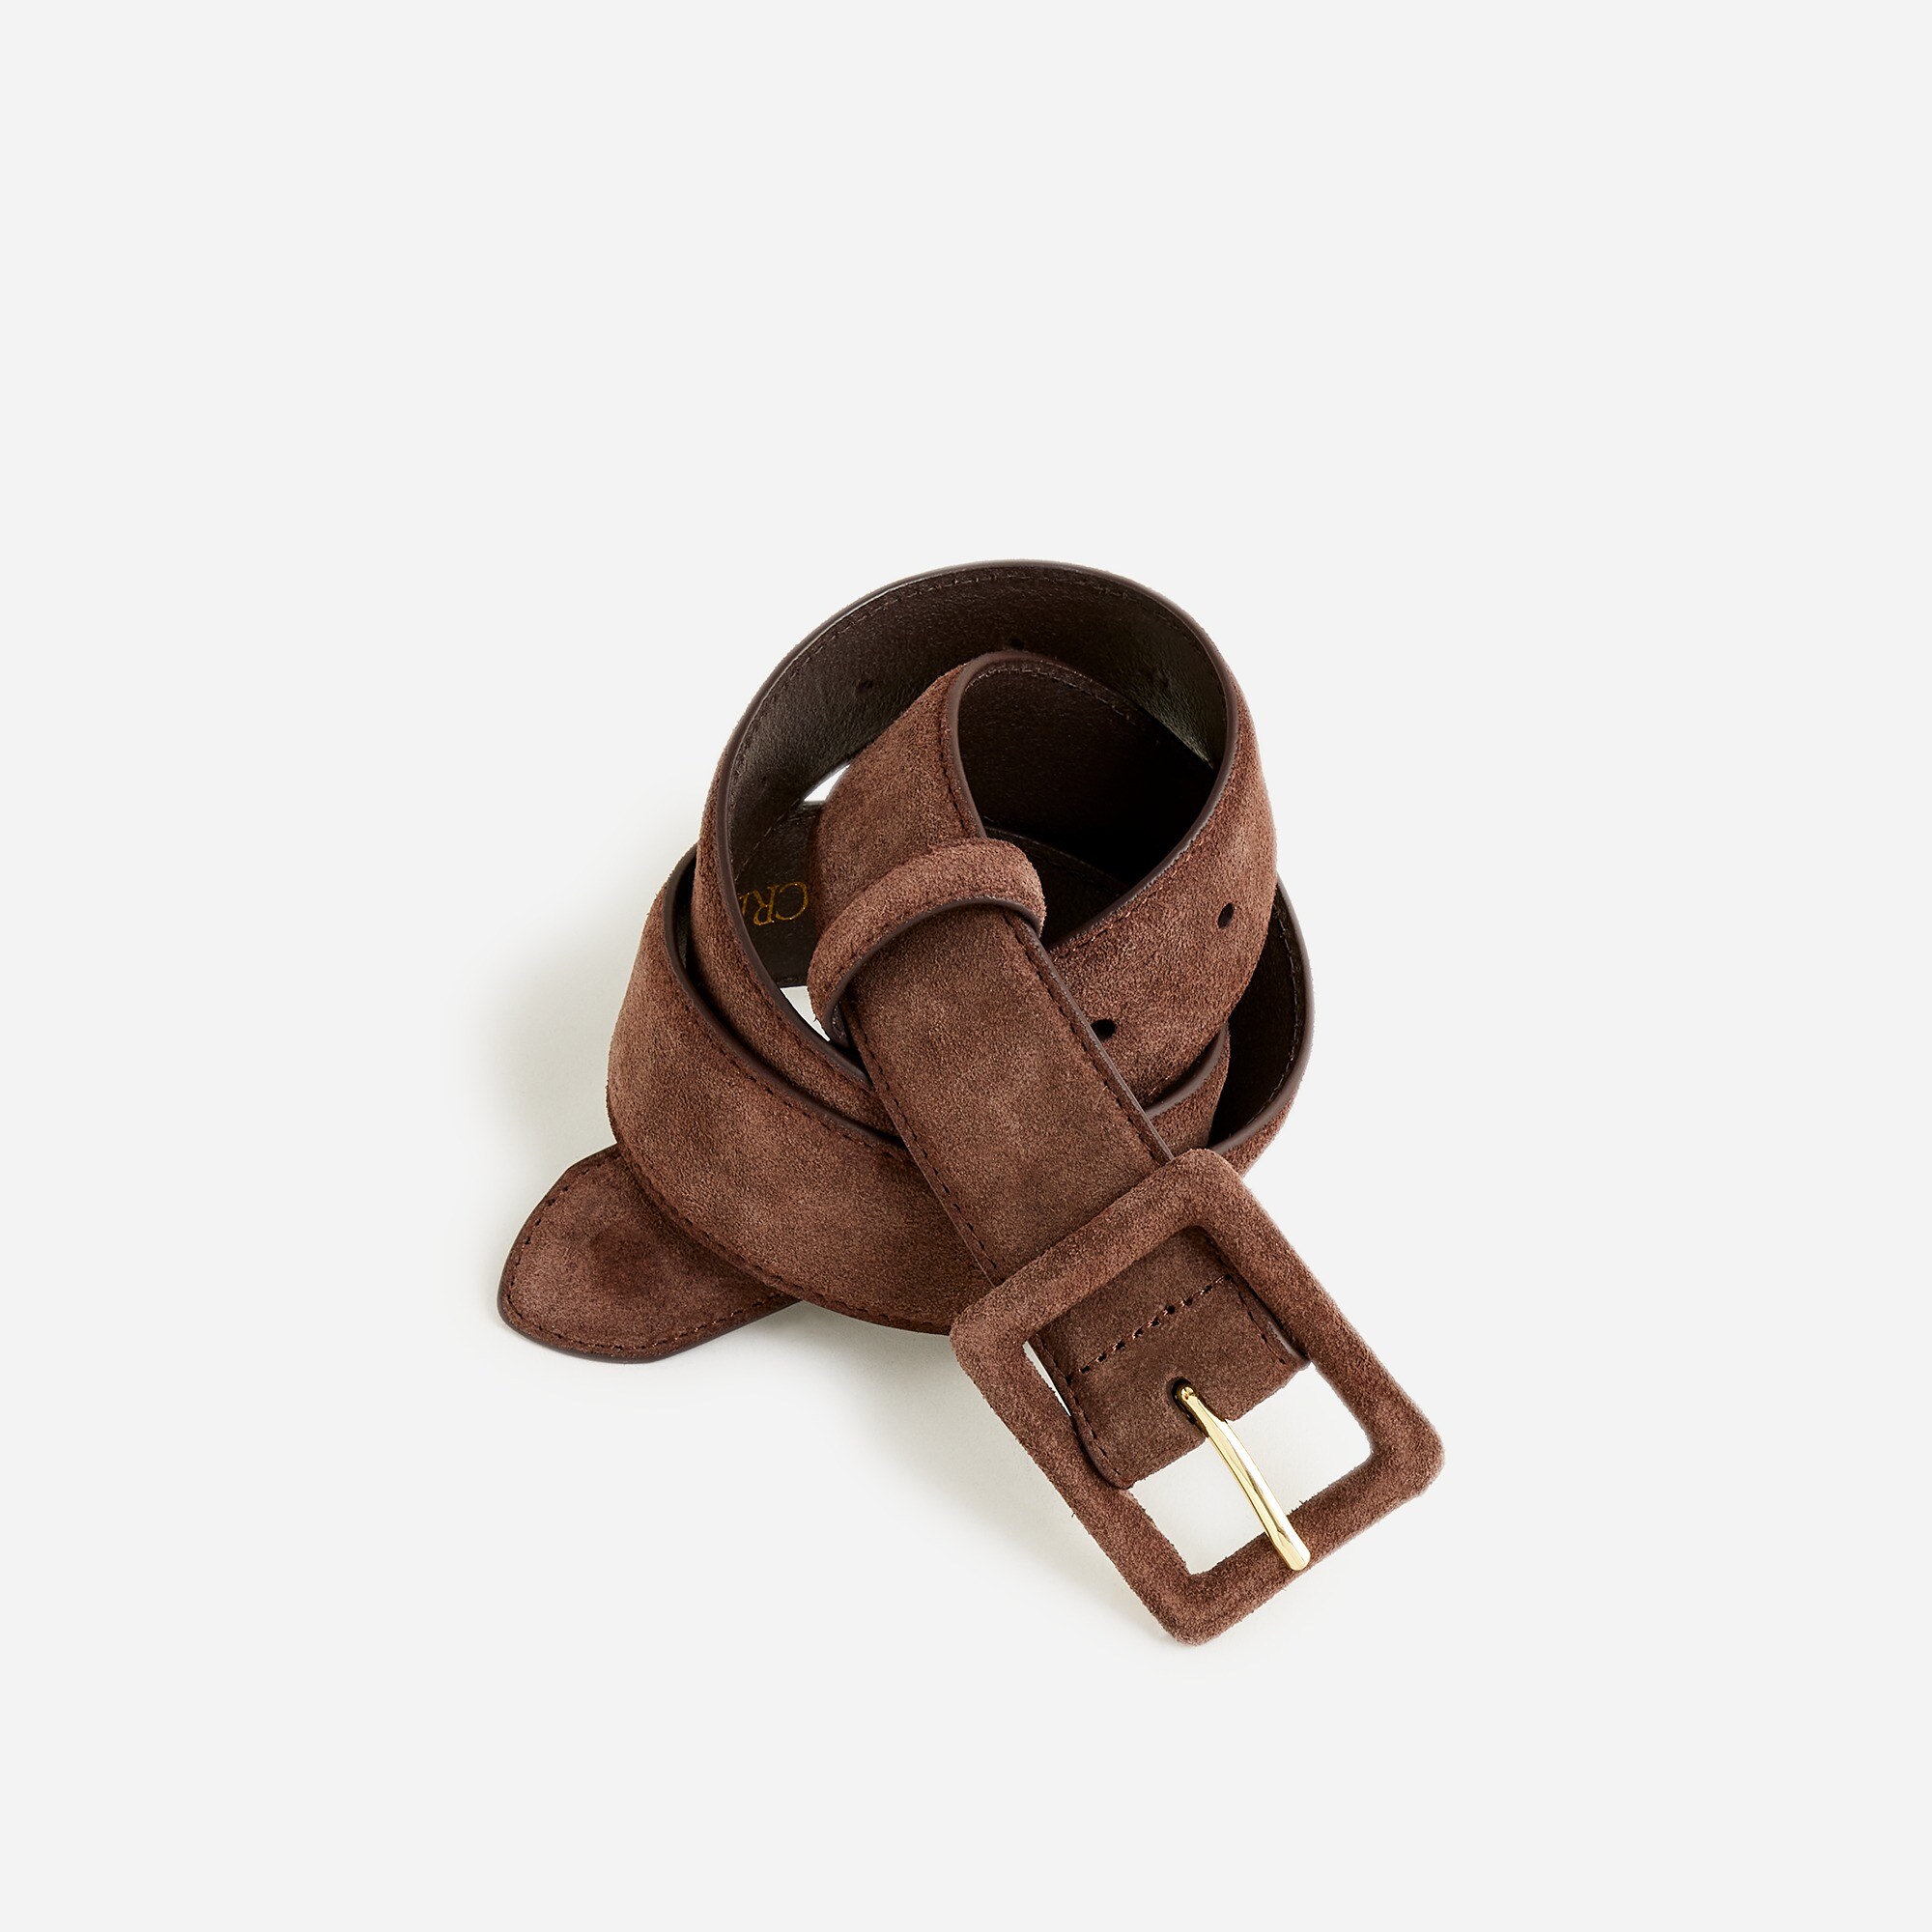  Square buckle belt in suede